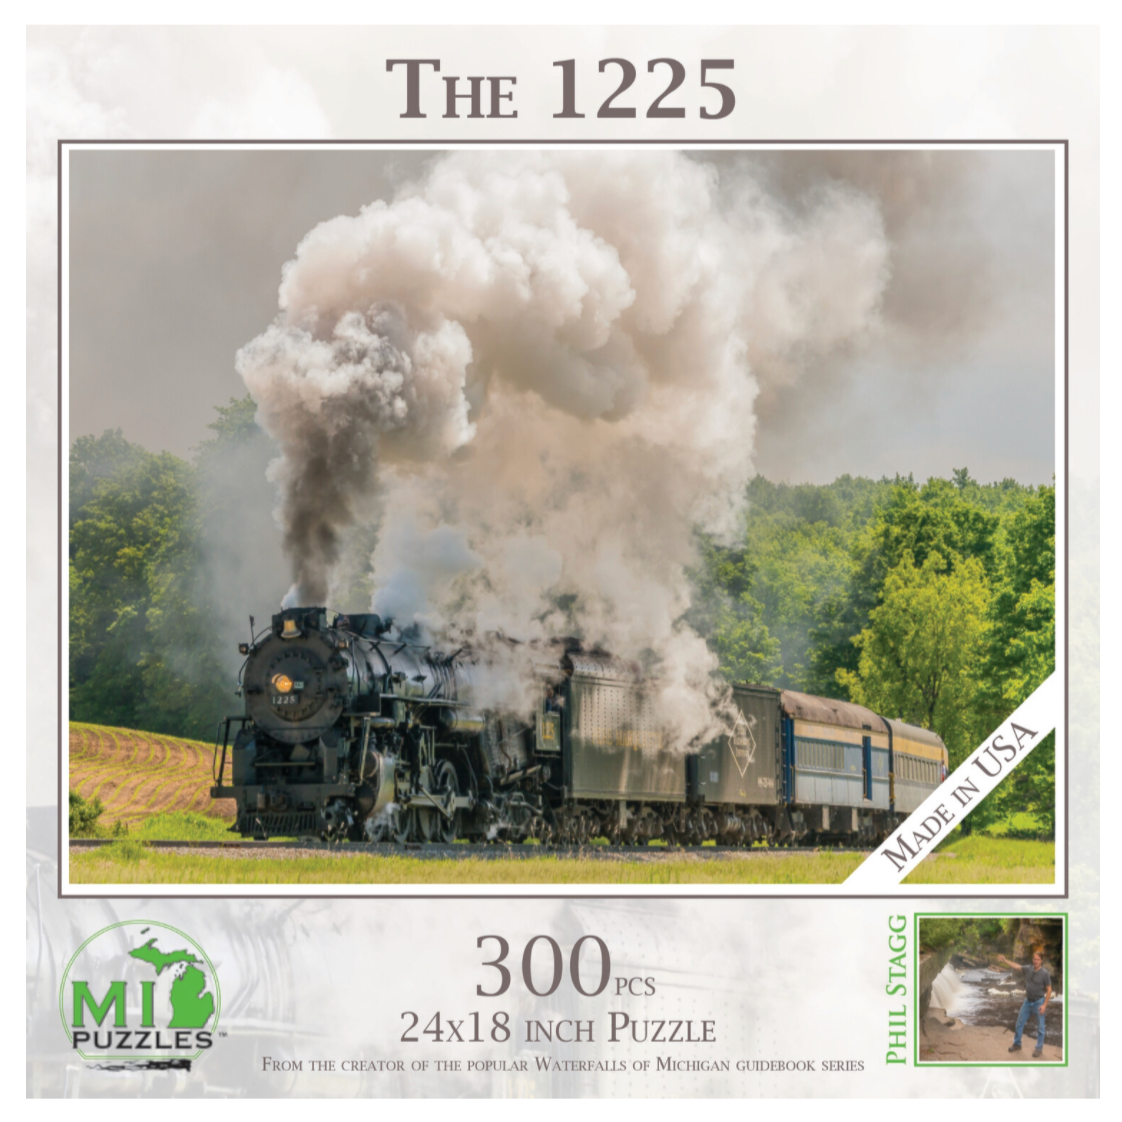 The 1225 300 pc Jigsaw Puzzle